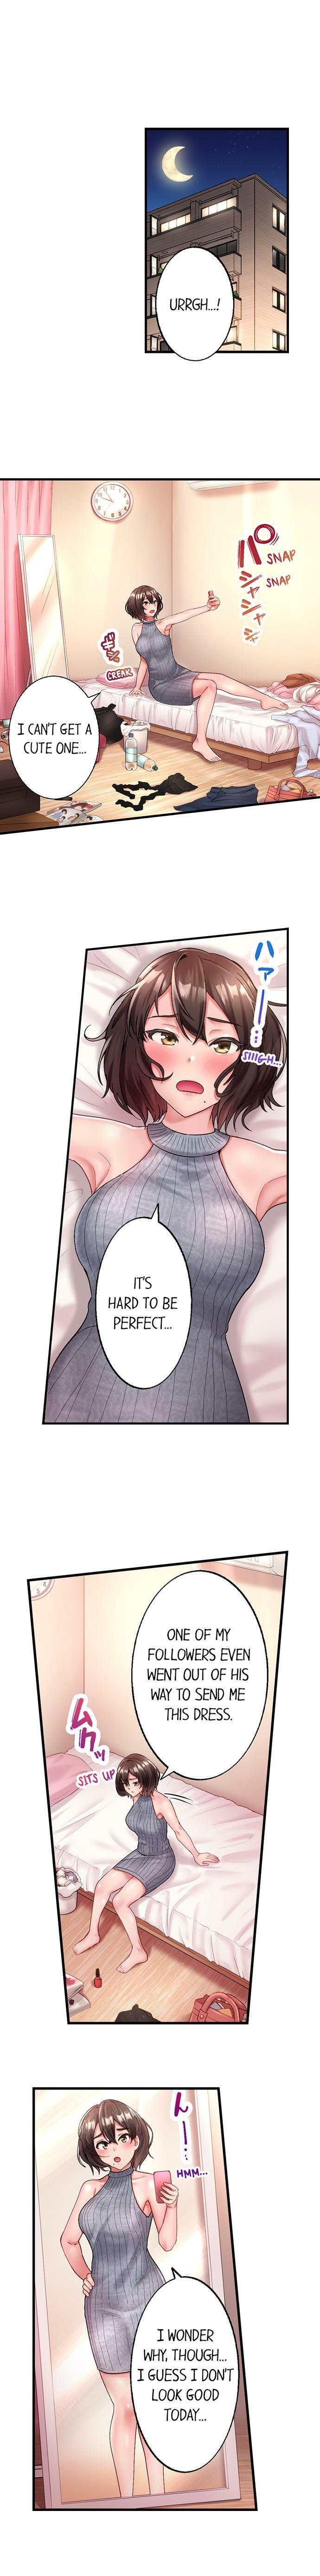 Sis [Kayanoi Ino] Busted by my Co-Worker 18/18 [English] Completed Piroca - Page 7